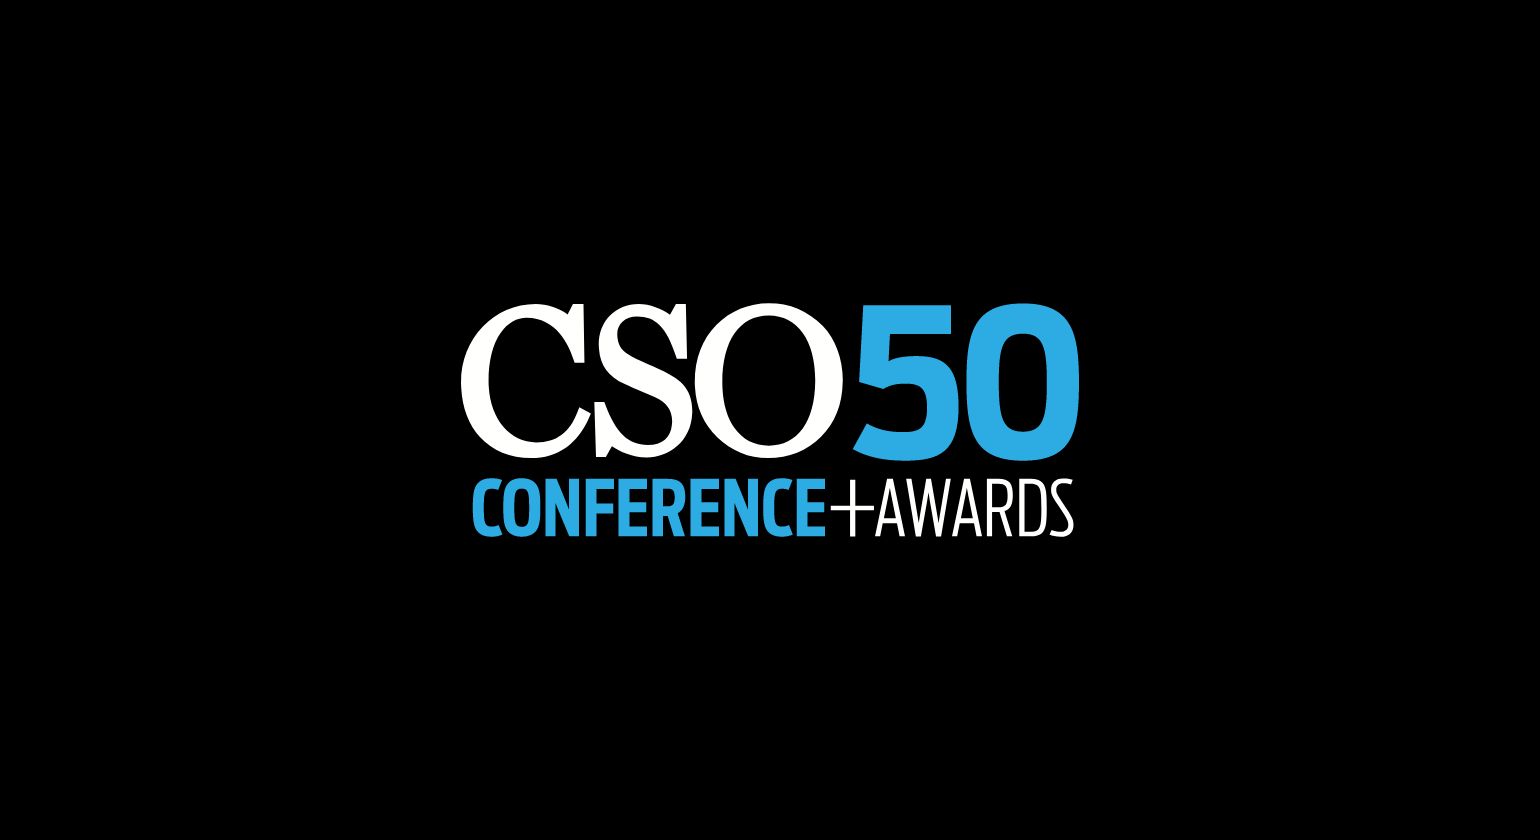 CSO 50 conference and awards logo